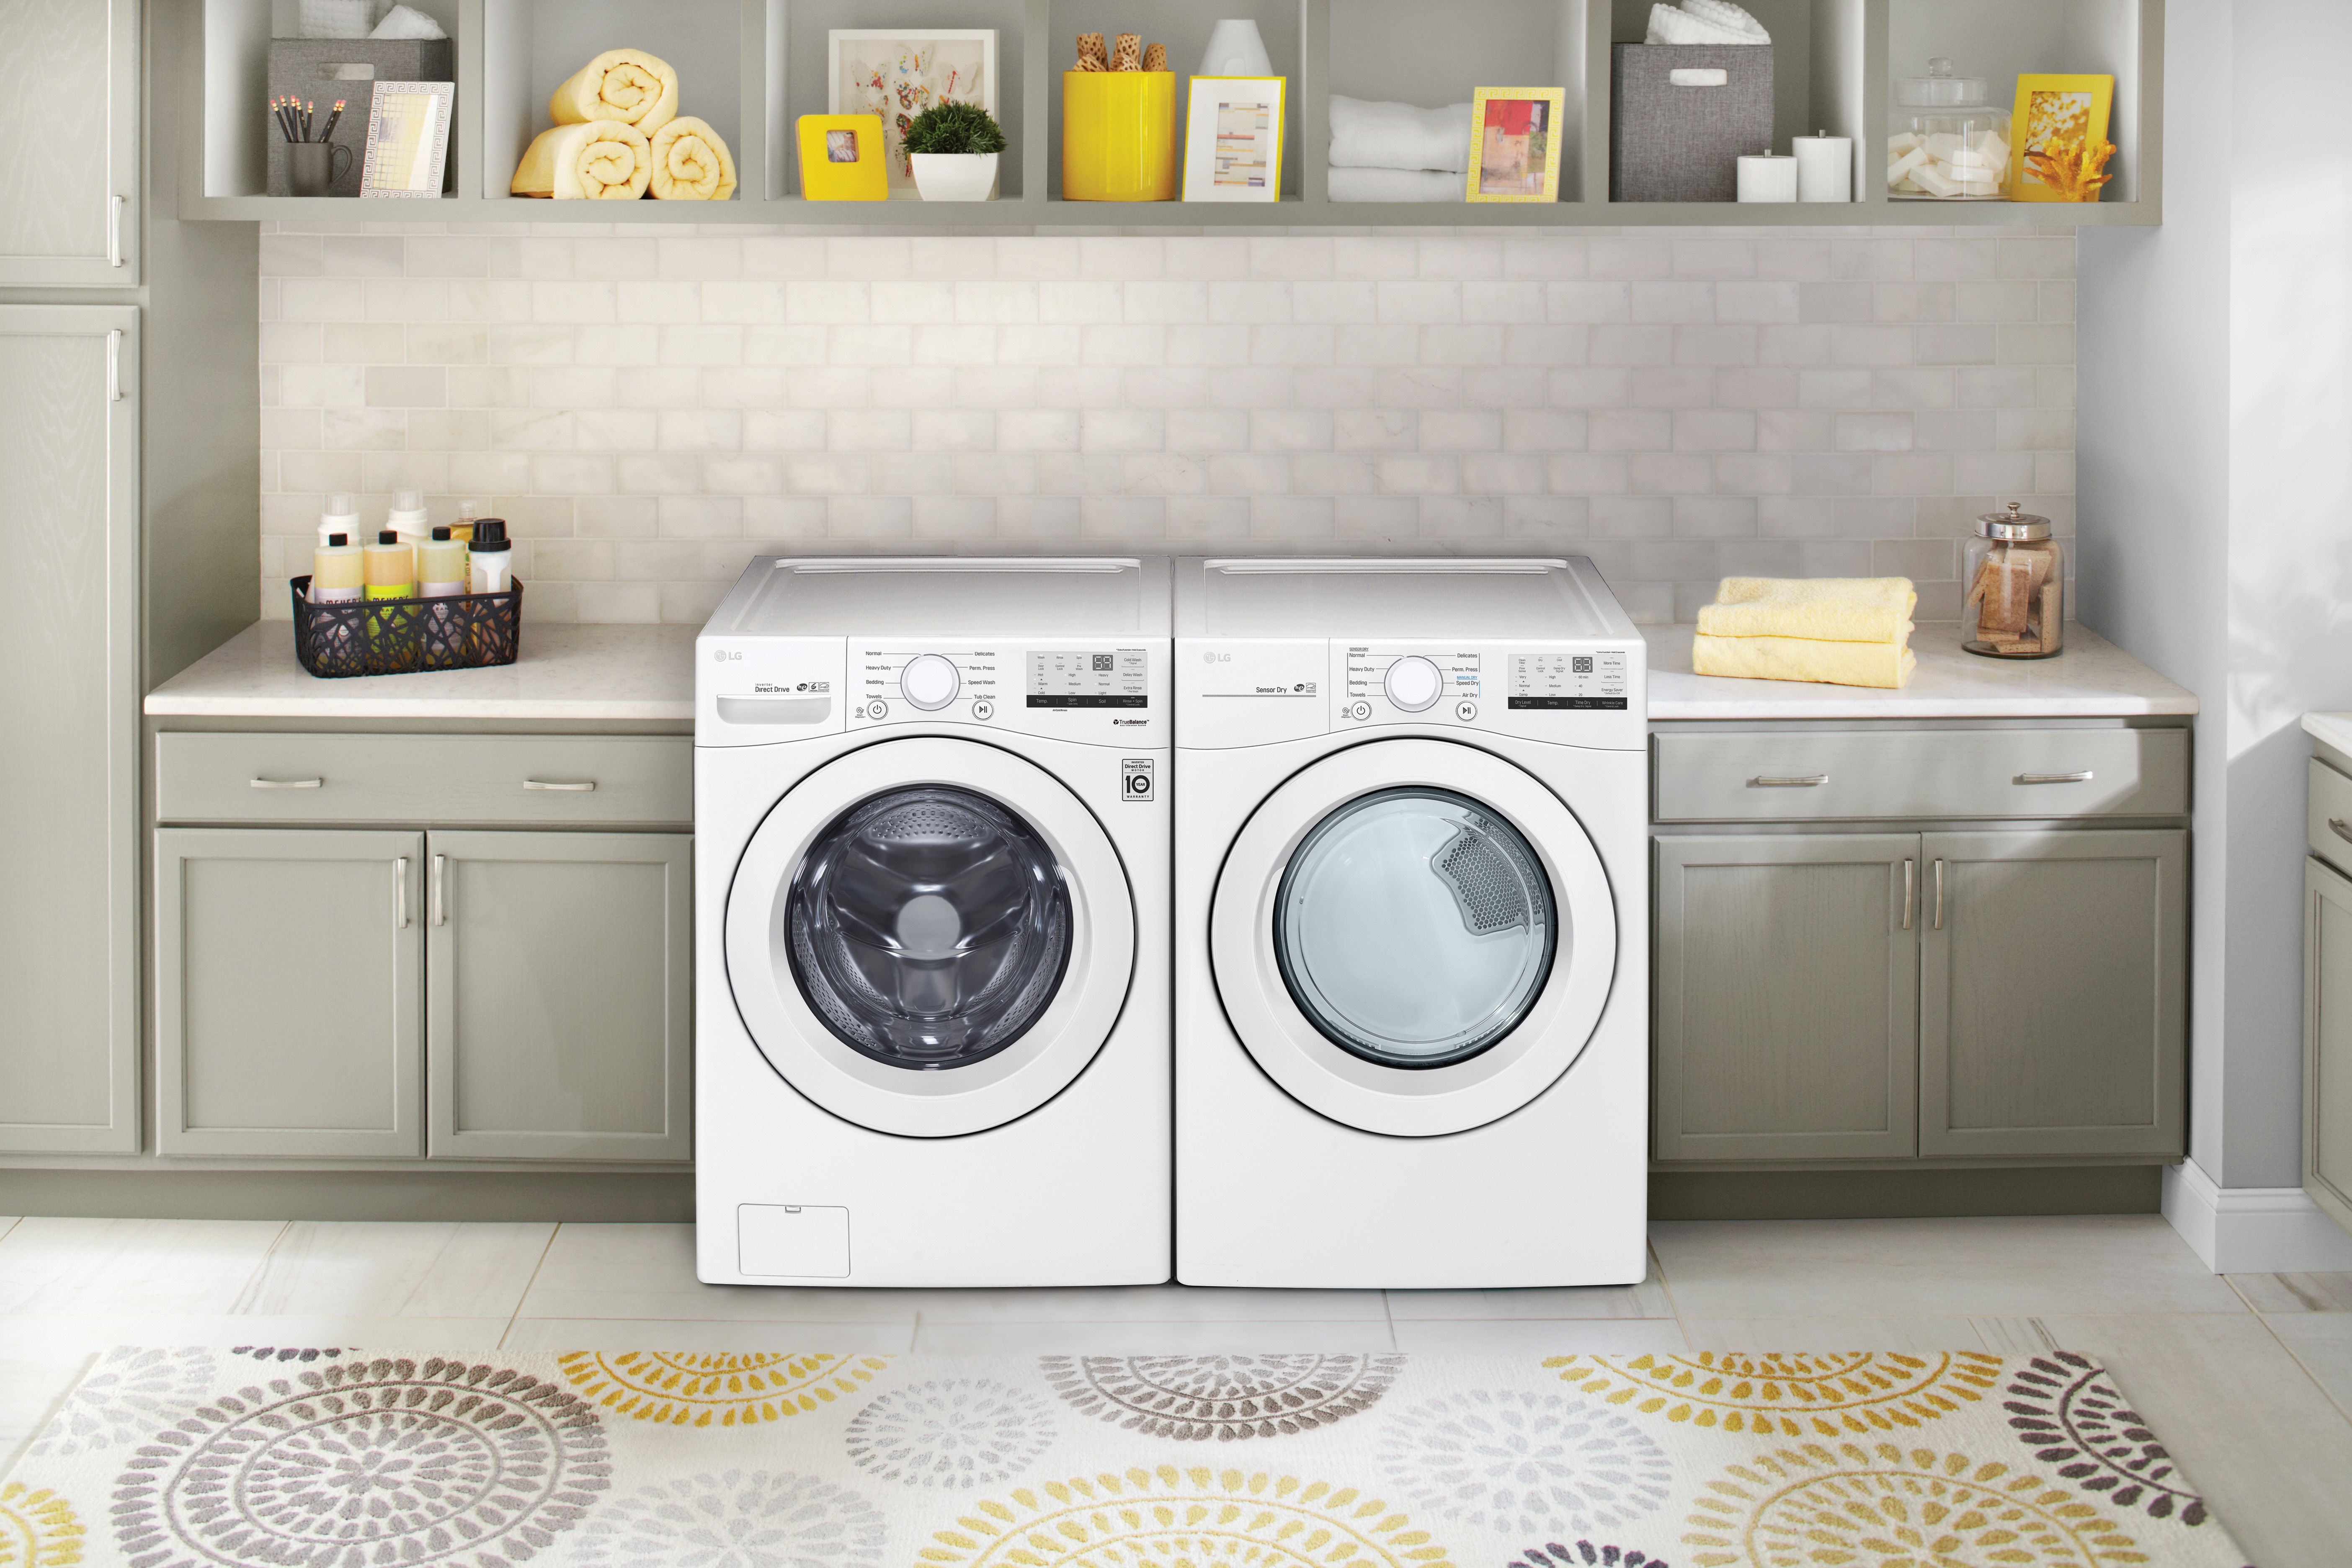 White LG top load washer and dryer in a laundry room